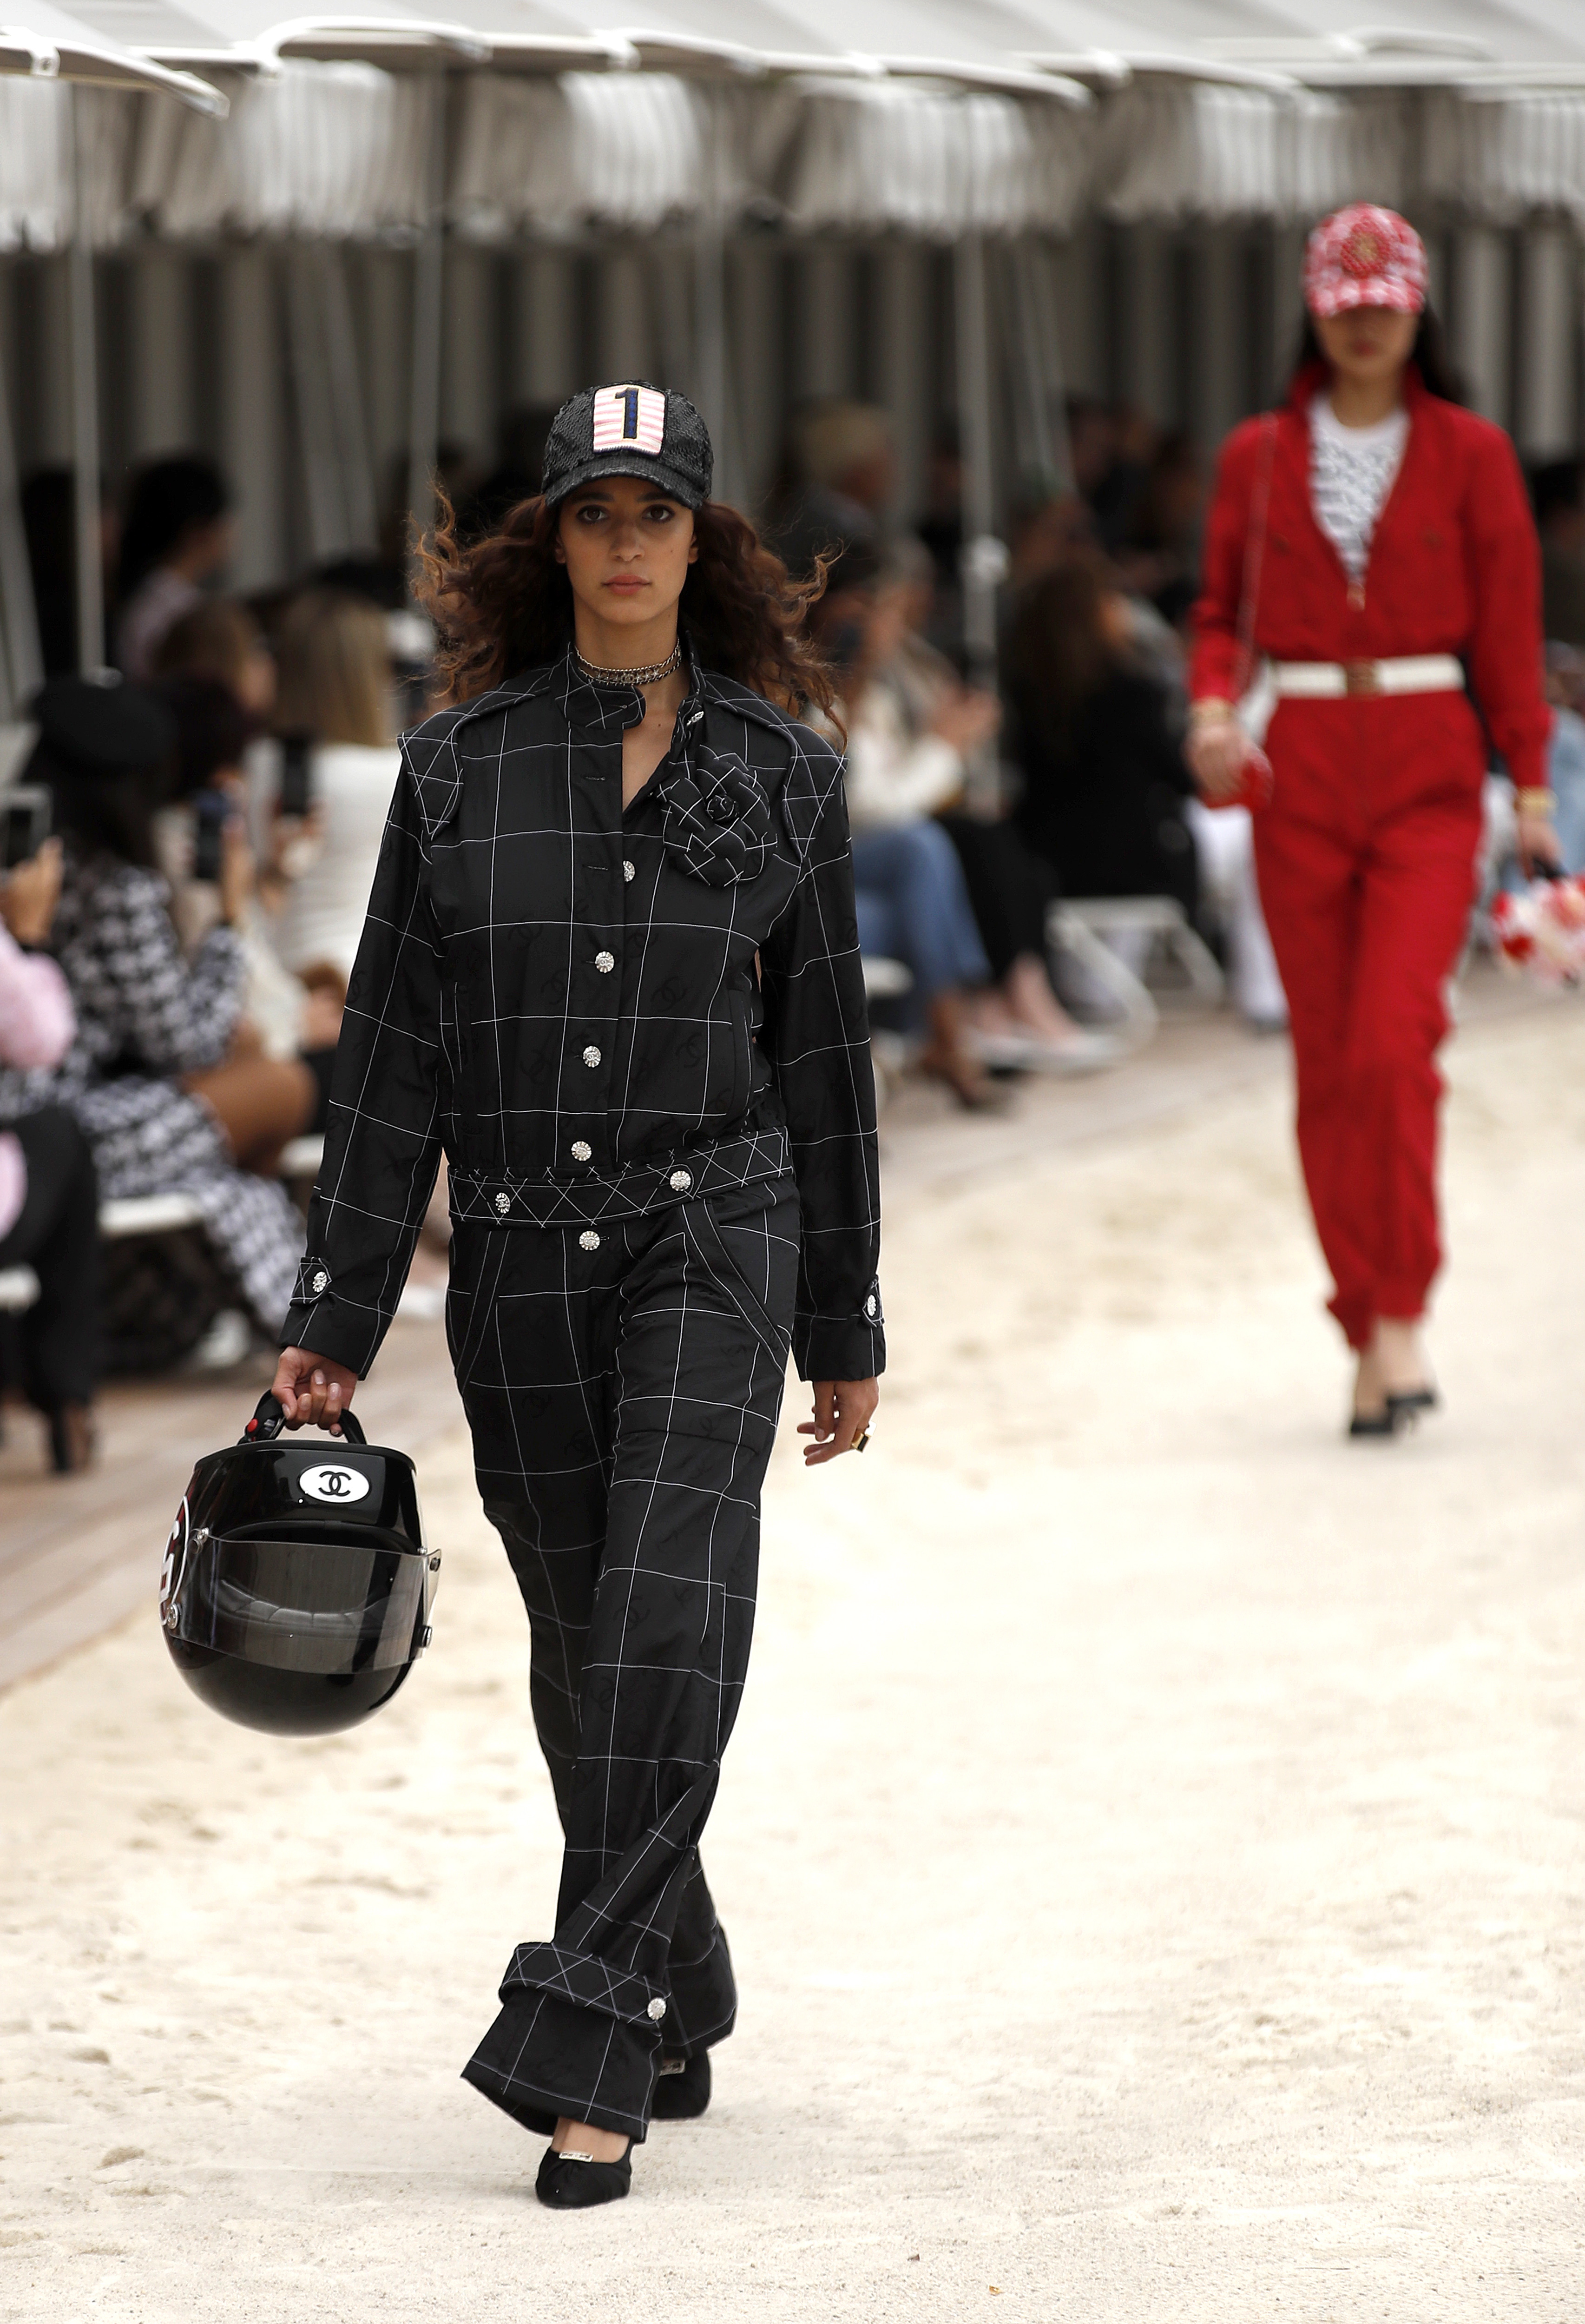 Chanel celebrates cruise life with Arab models in Monte Carlo